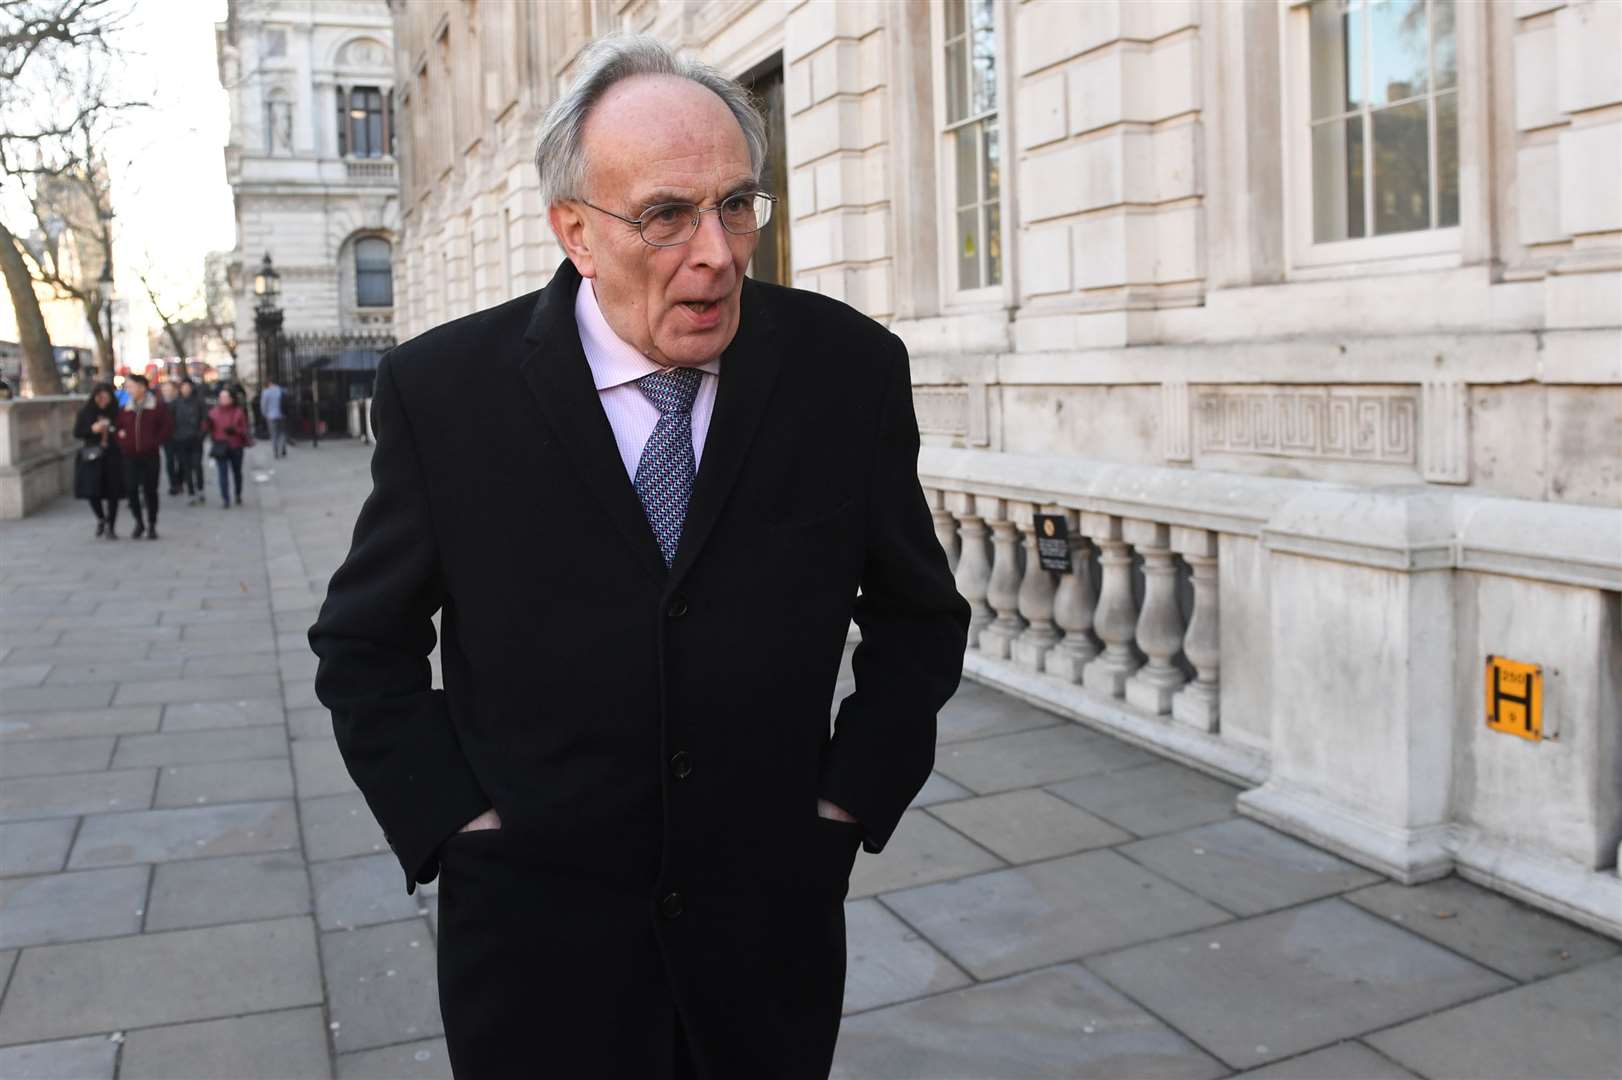 Peter Bone denied the allegations (PA)